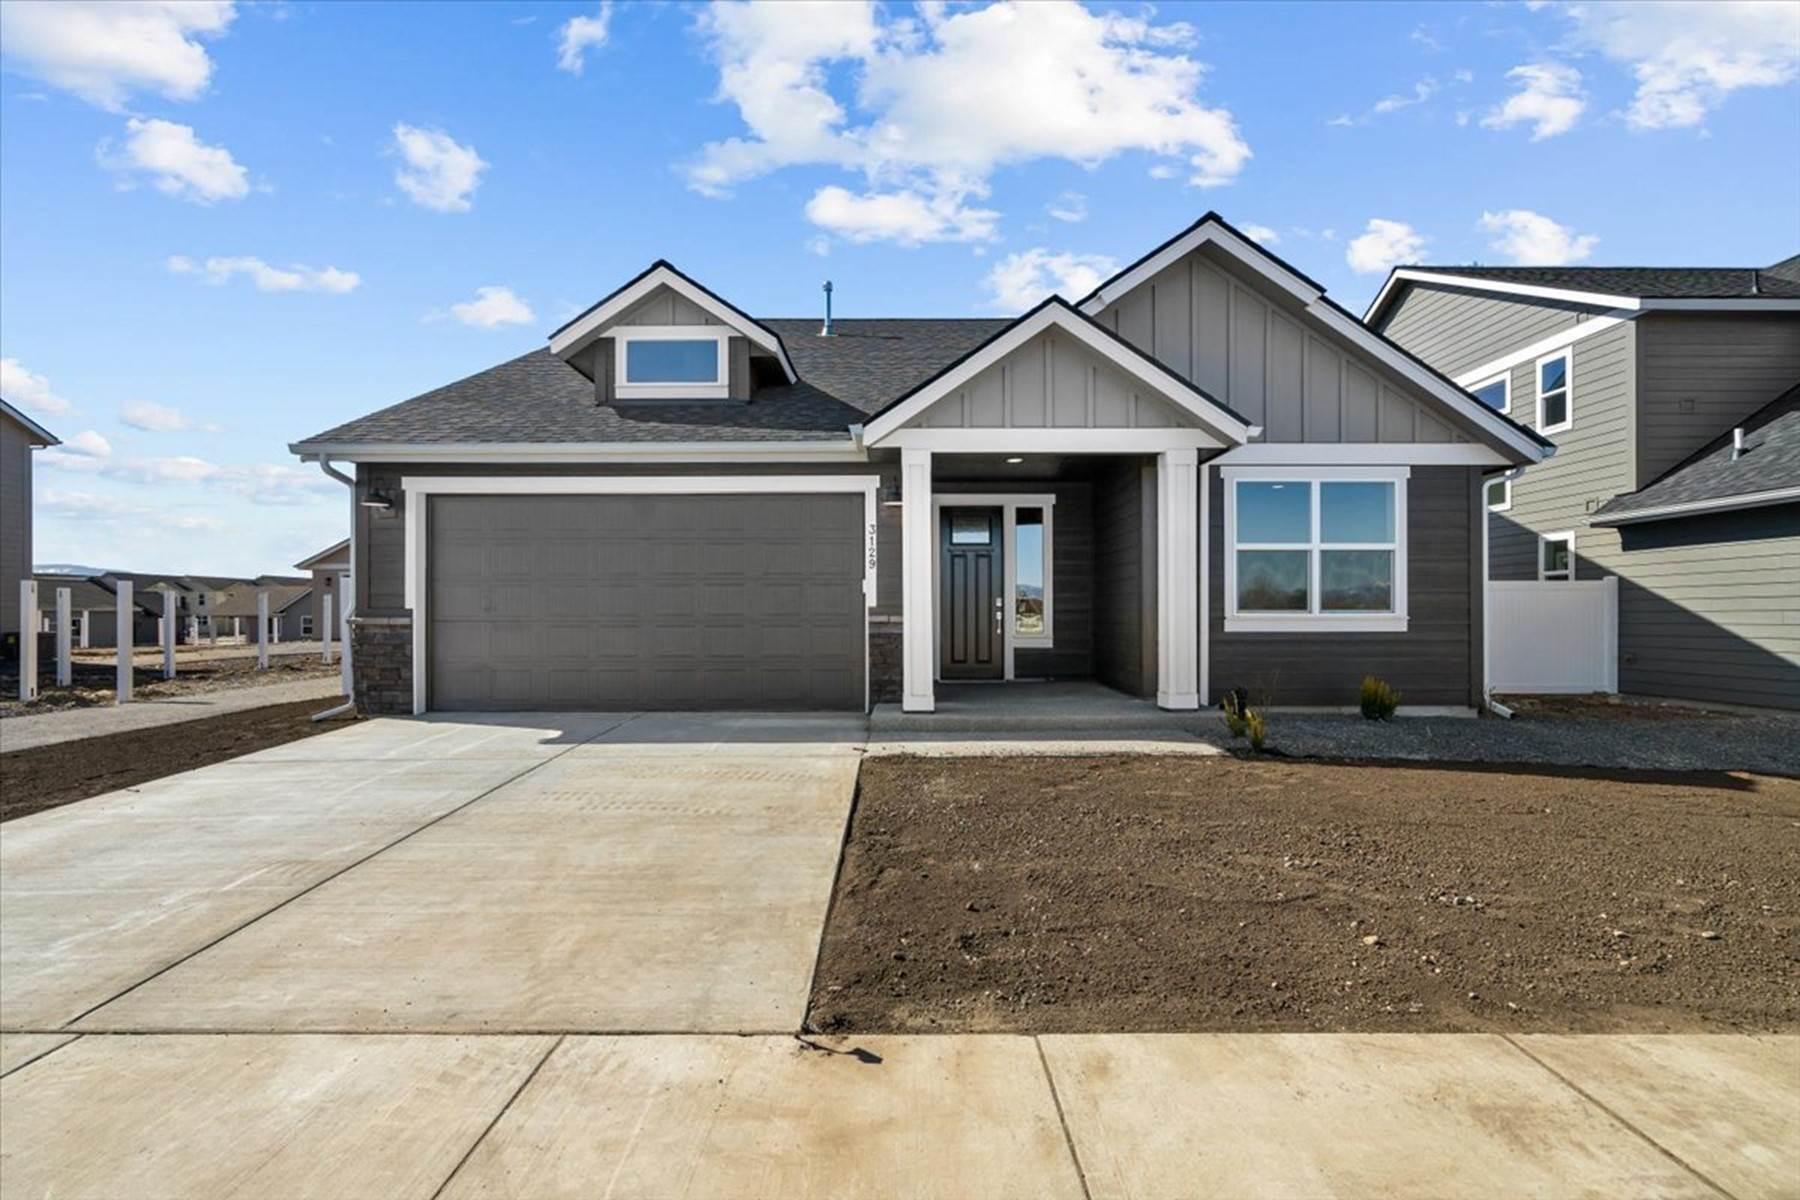 Single Family Homes for Sale at The Bridger w/Detached Garage 3129 N Cassiopeia St Post Falls, Idaho 83854 United States